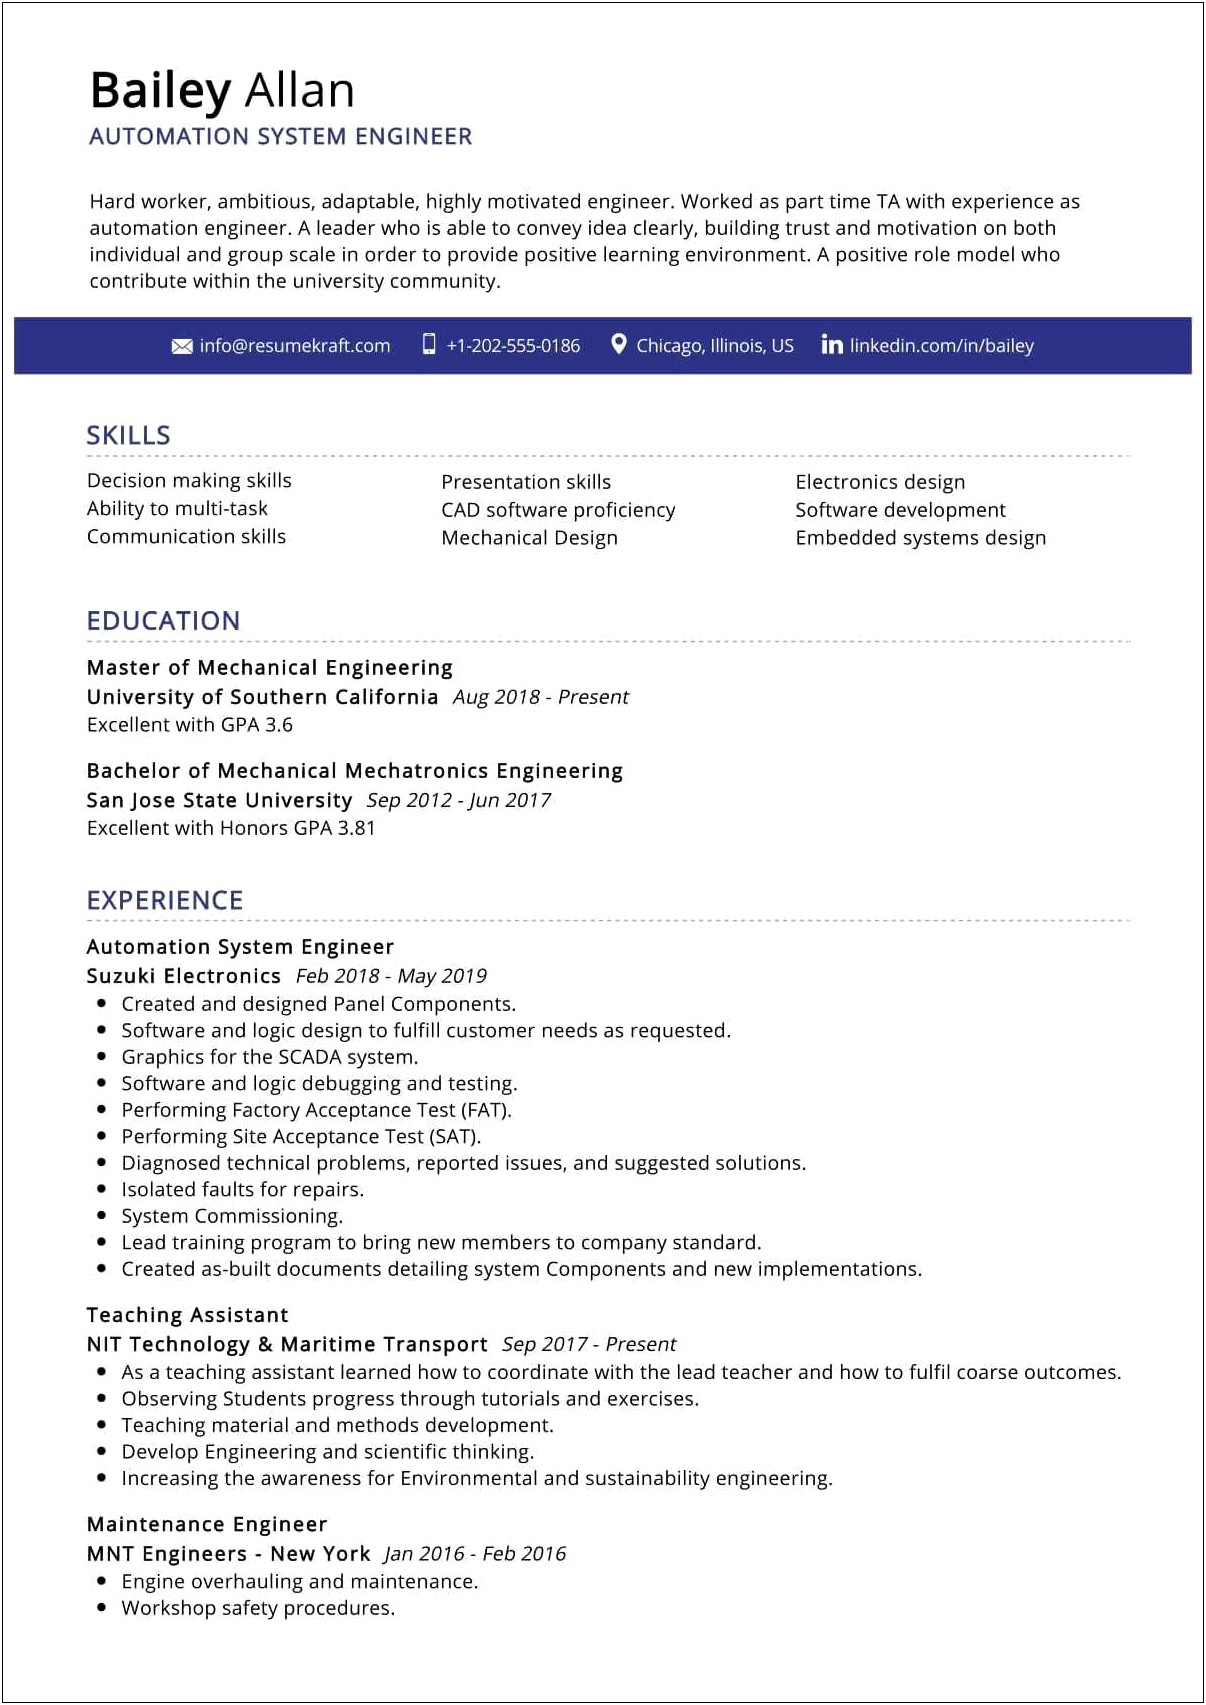 Resume Objective For Cad Engineer